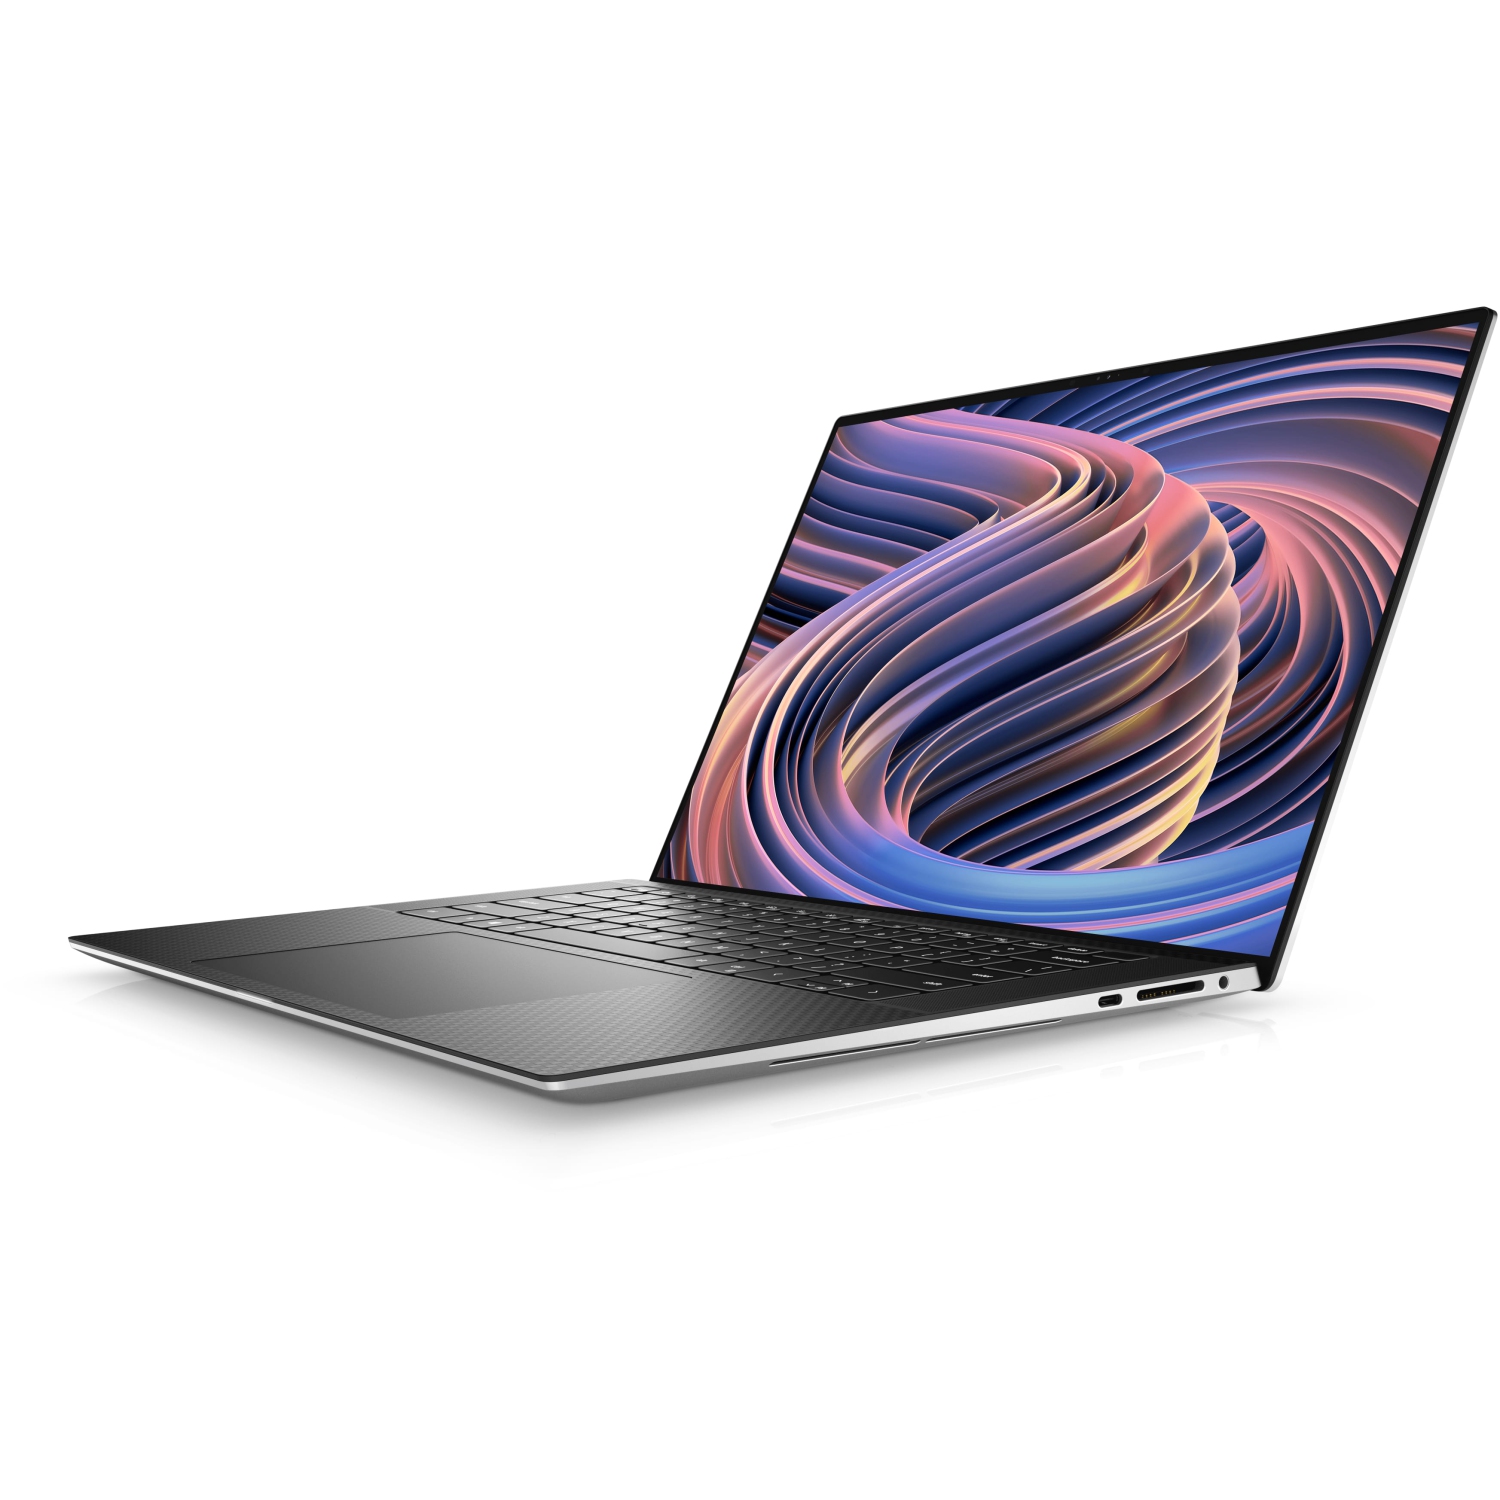 Dell XPS 15 9520 Laptop (2022) | 15.6" FHD+ | Core i9 - 1TB SSD - 64GB RAM - 3050 Ti | 14 Cores @ 5 GHz - 12th Gen CPU Certified Refurbished